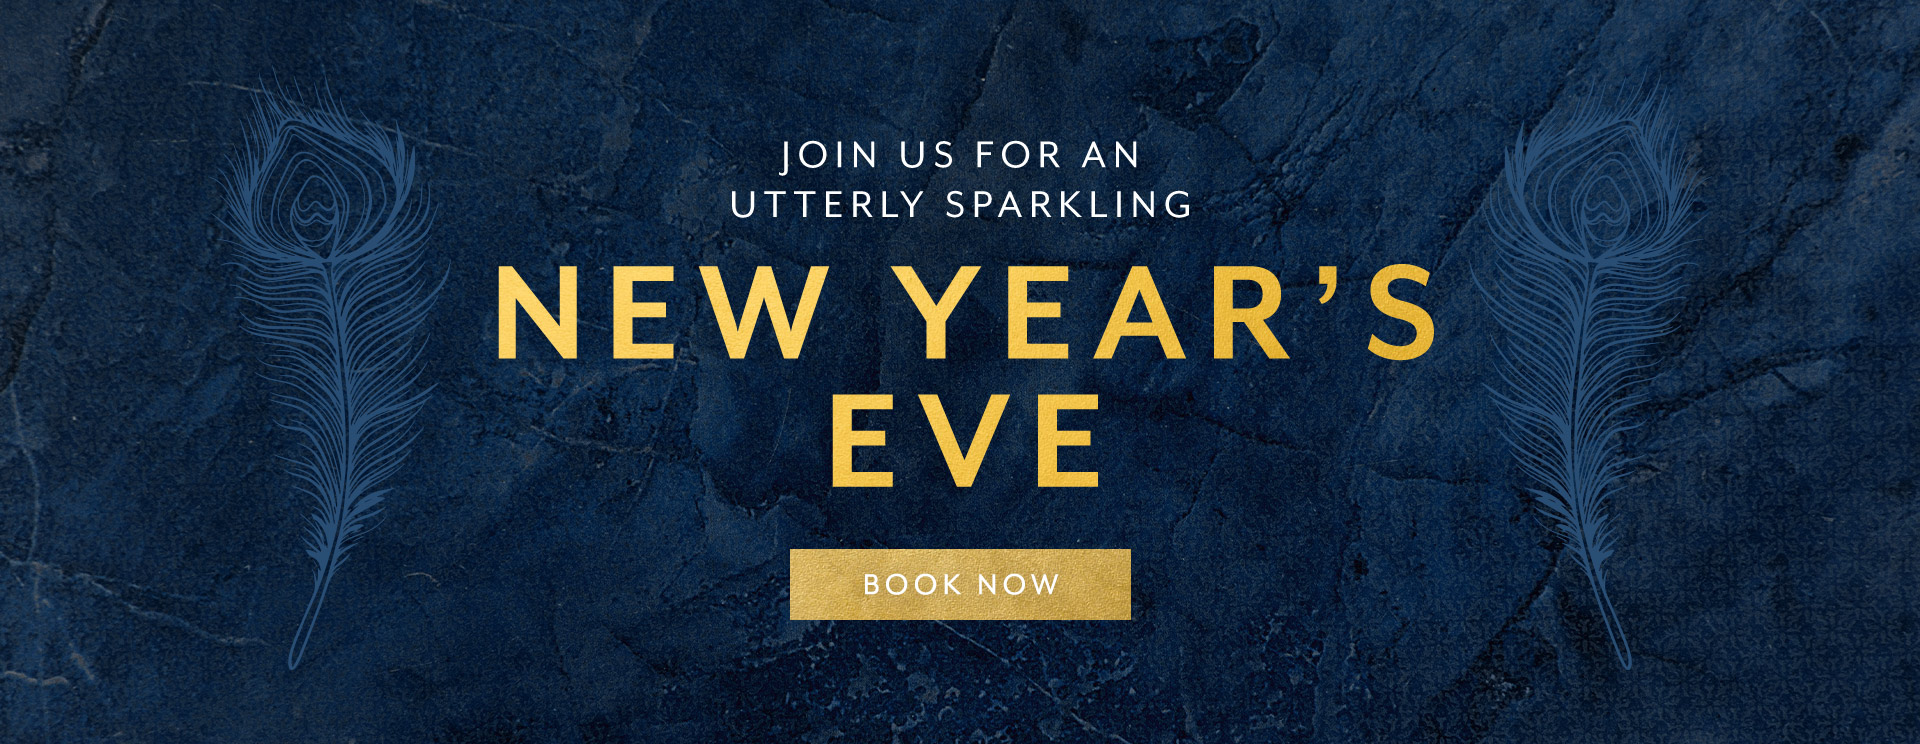 New Year's Eve at The Horse & Groom